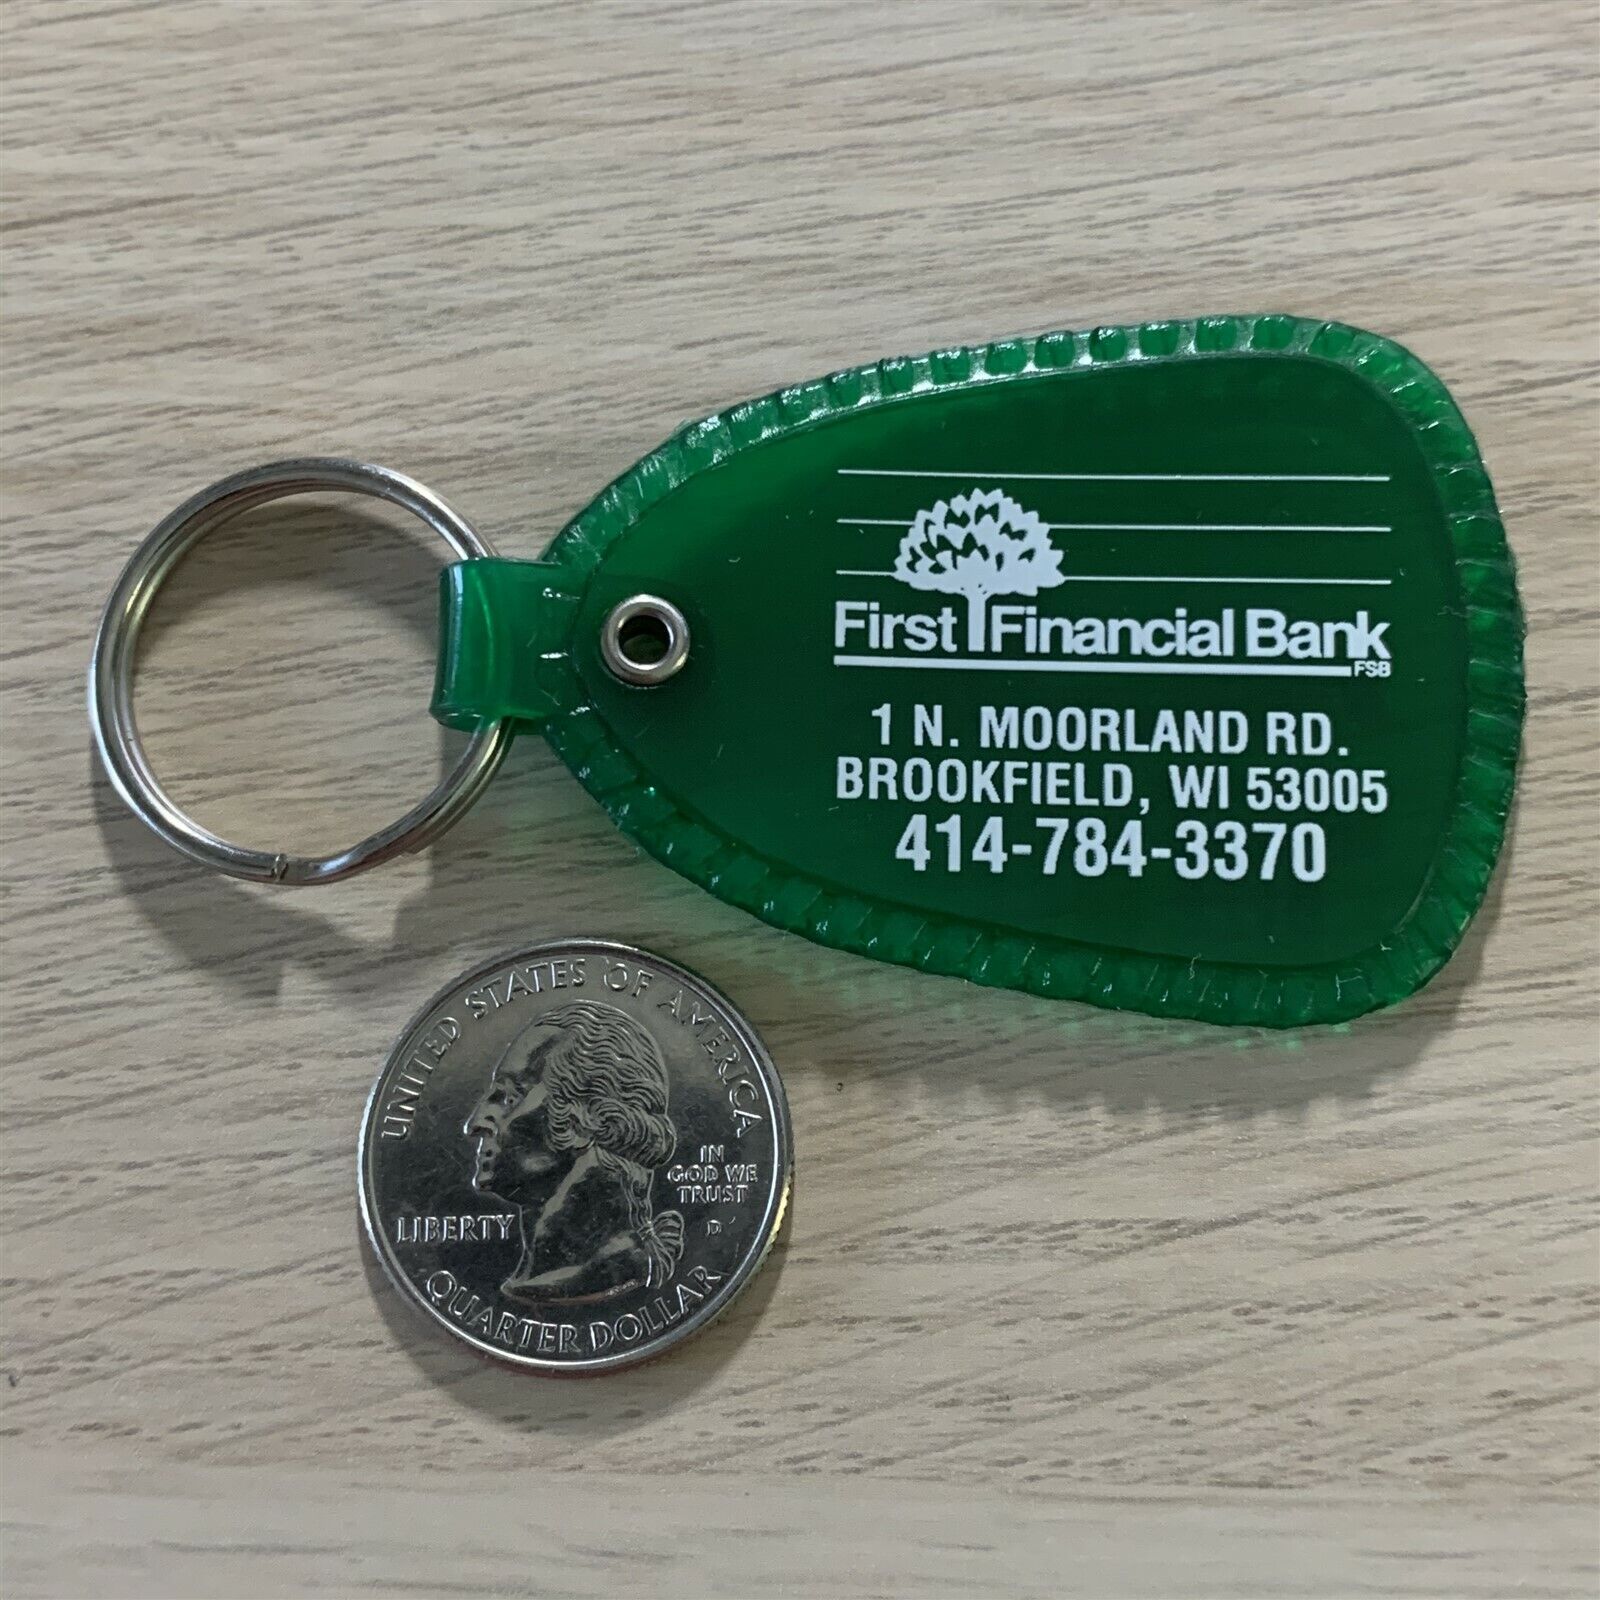 First Financial Bank Brookfield Wisconsin Green Keychain Key Ring #37931